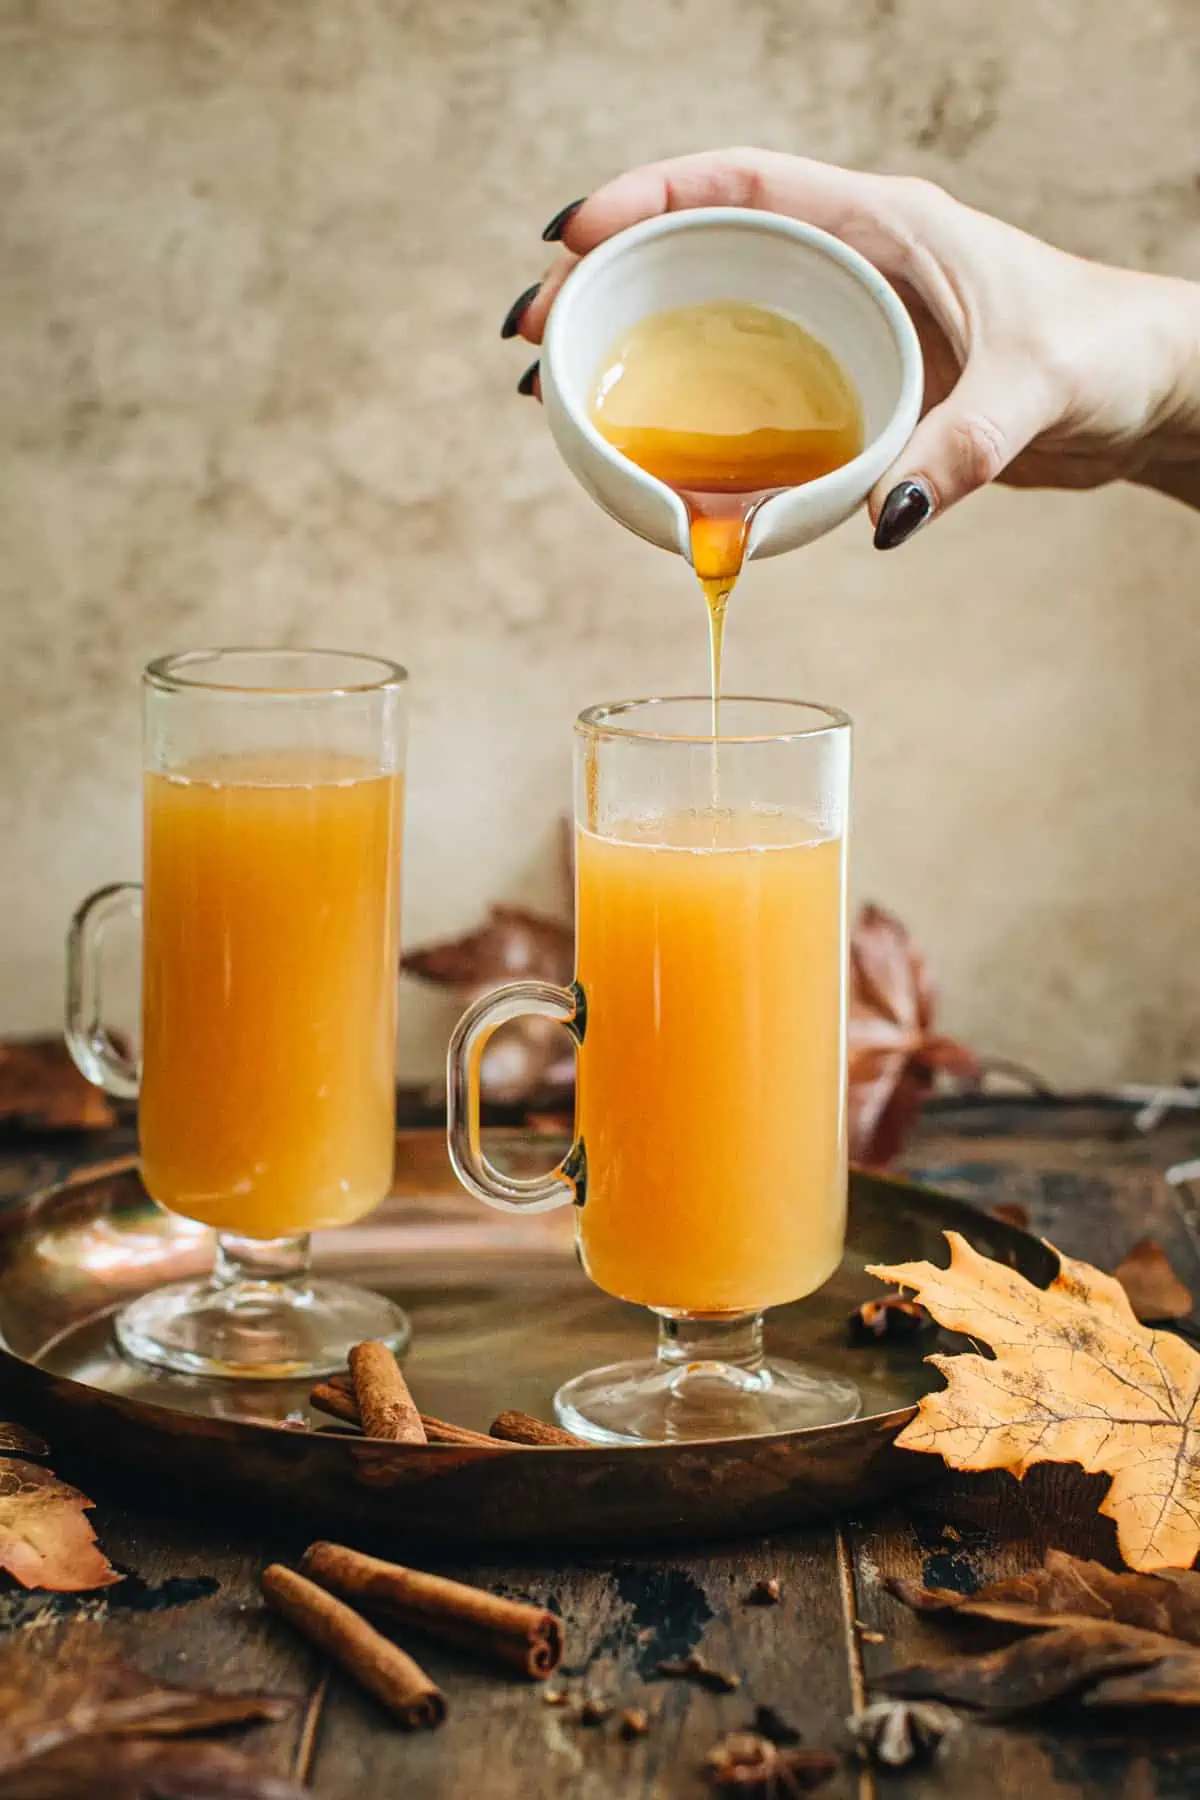 Dripping honey over hot apple cider for an Apple Cider Hot Toddy.